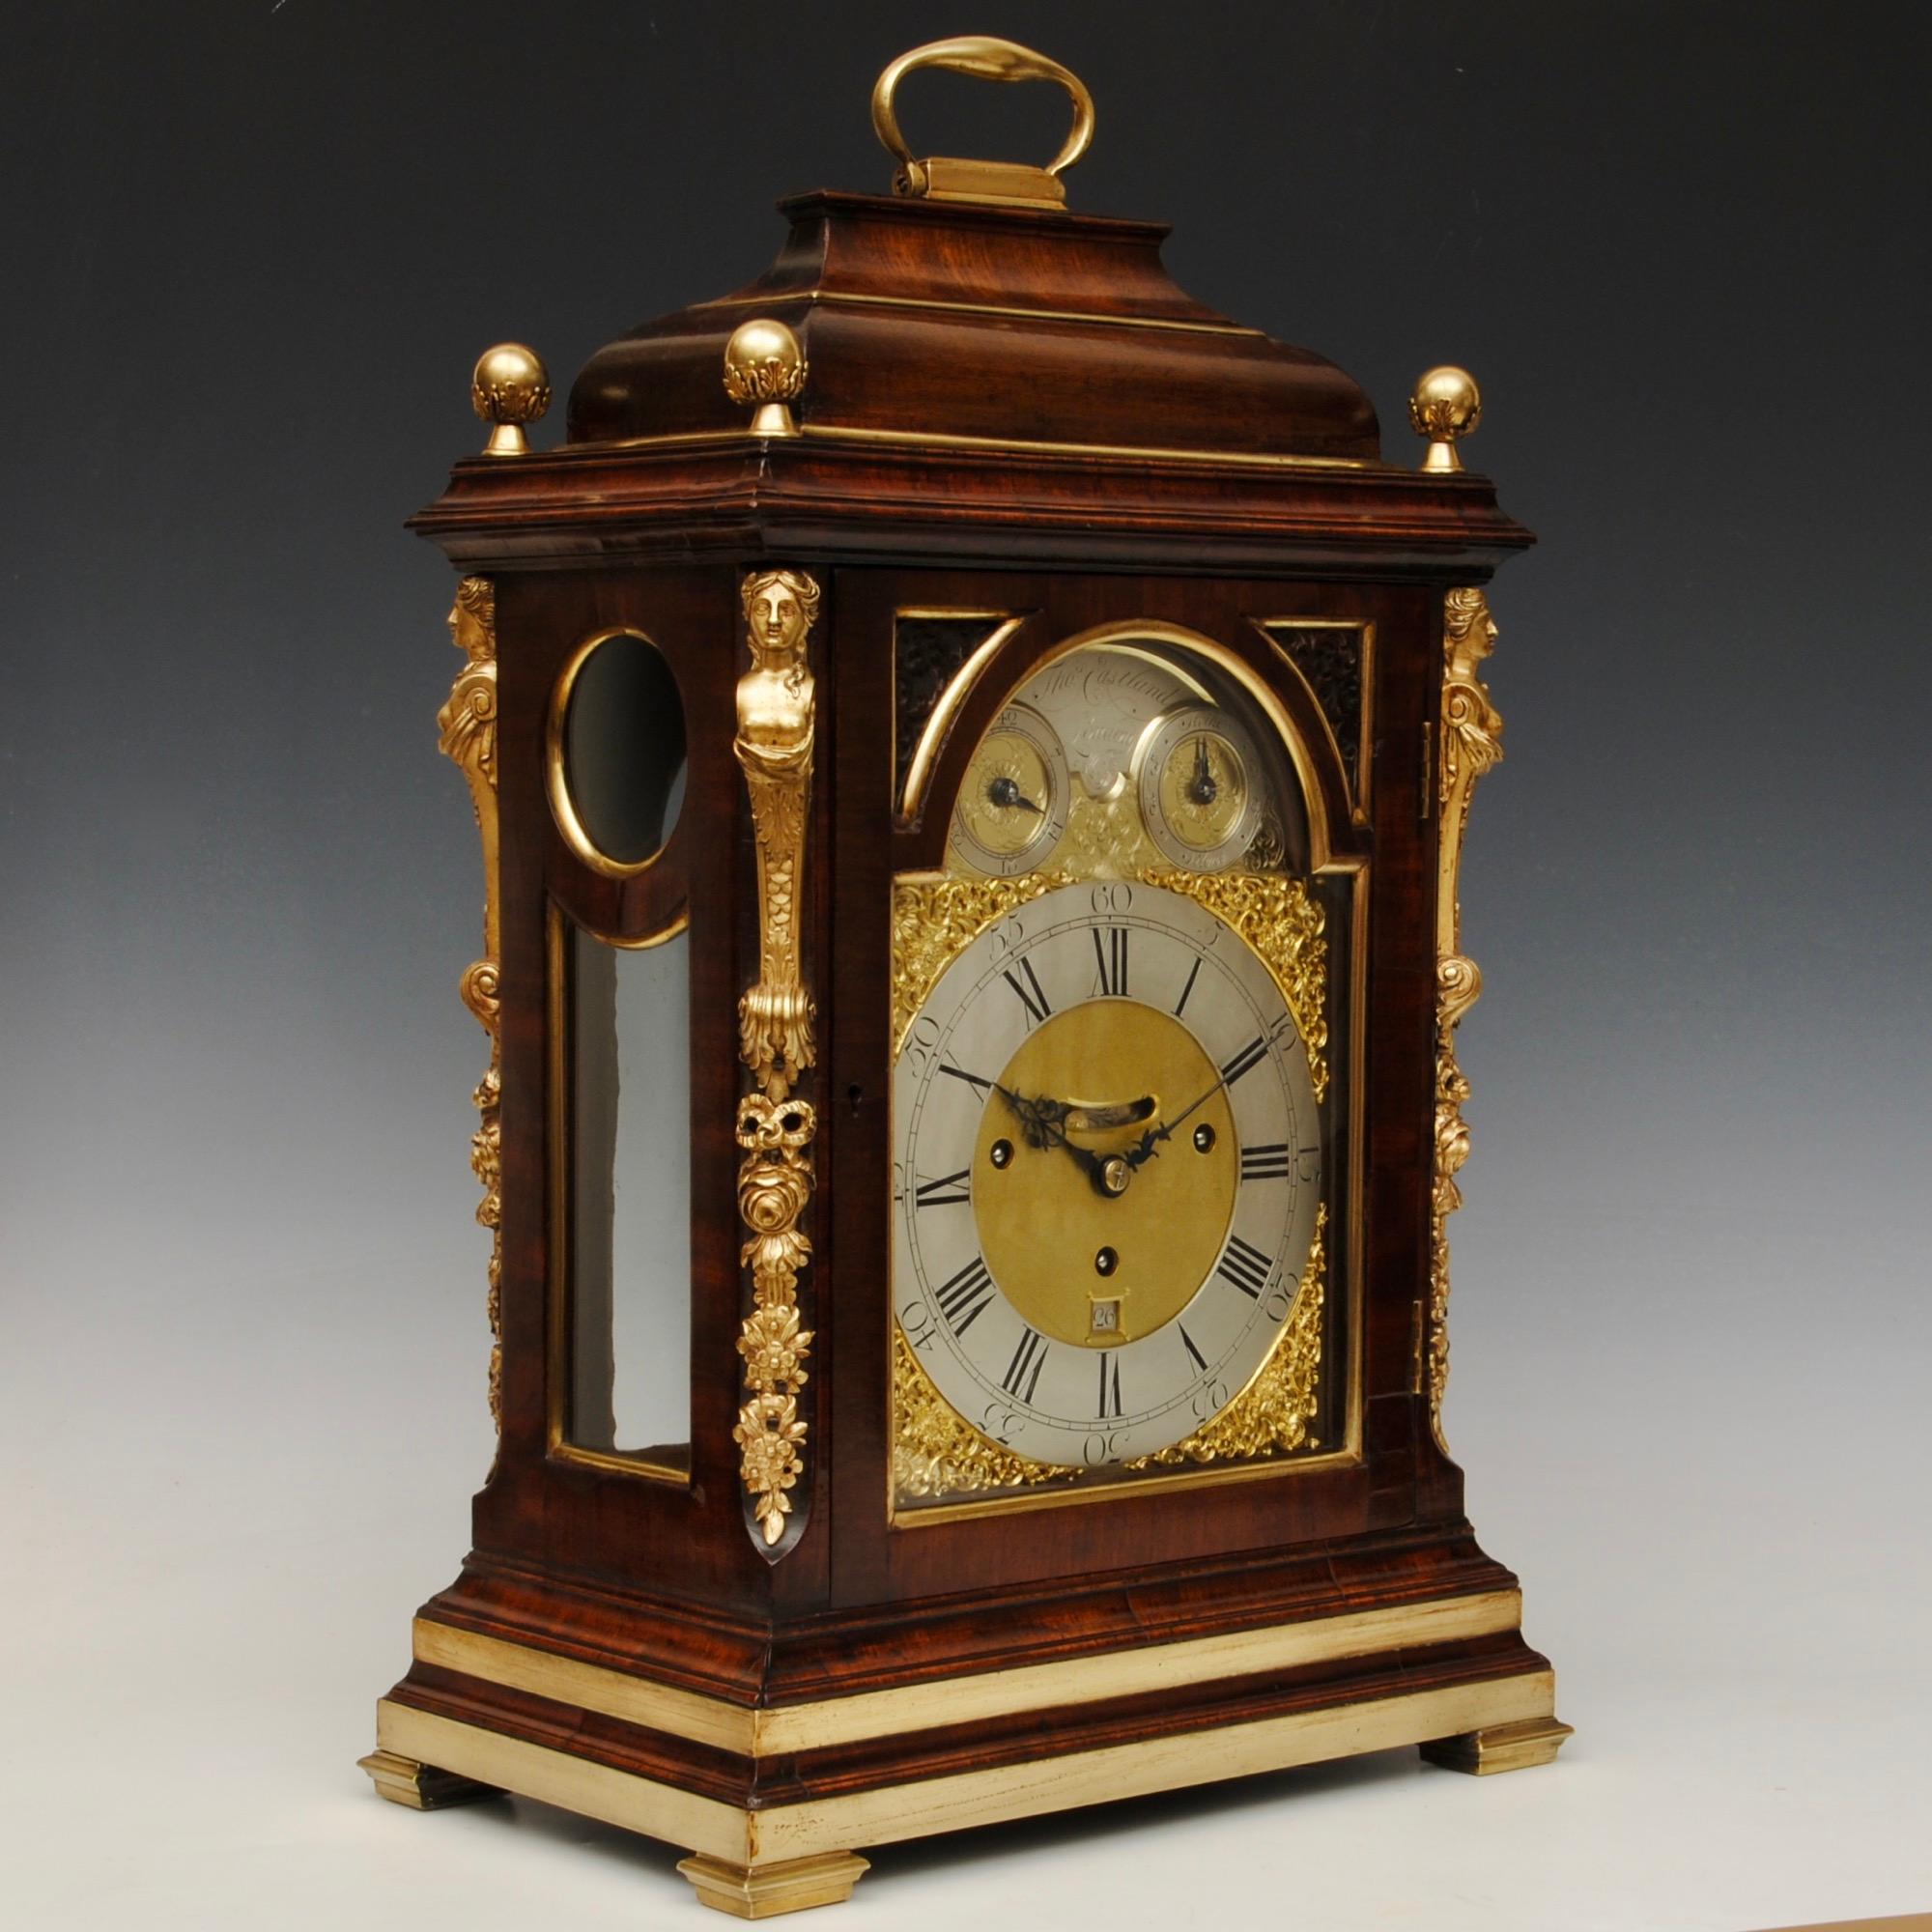 An 18th century mahogany bell top bracket clock with ormolu caryatids to the corners of the fine quality case. The eight day three train movement striking on eight bells now with anchor escapement. The full silvered dial signed in the arch Thomas